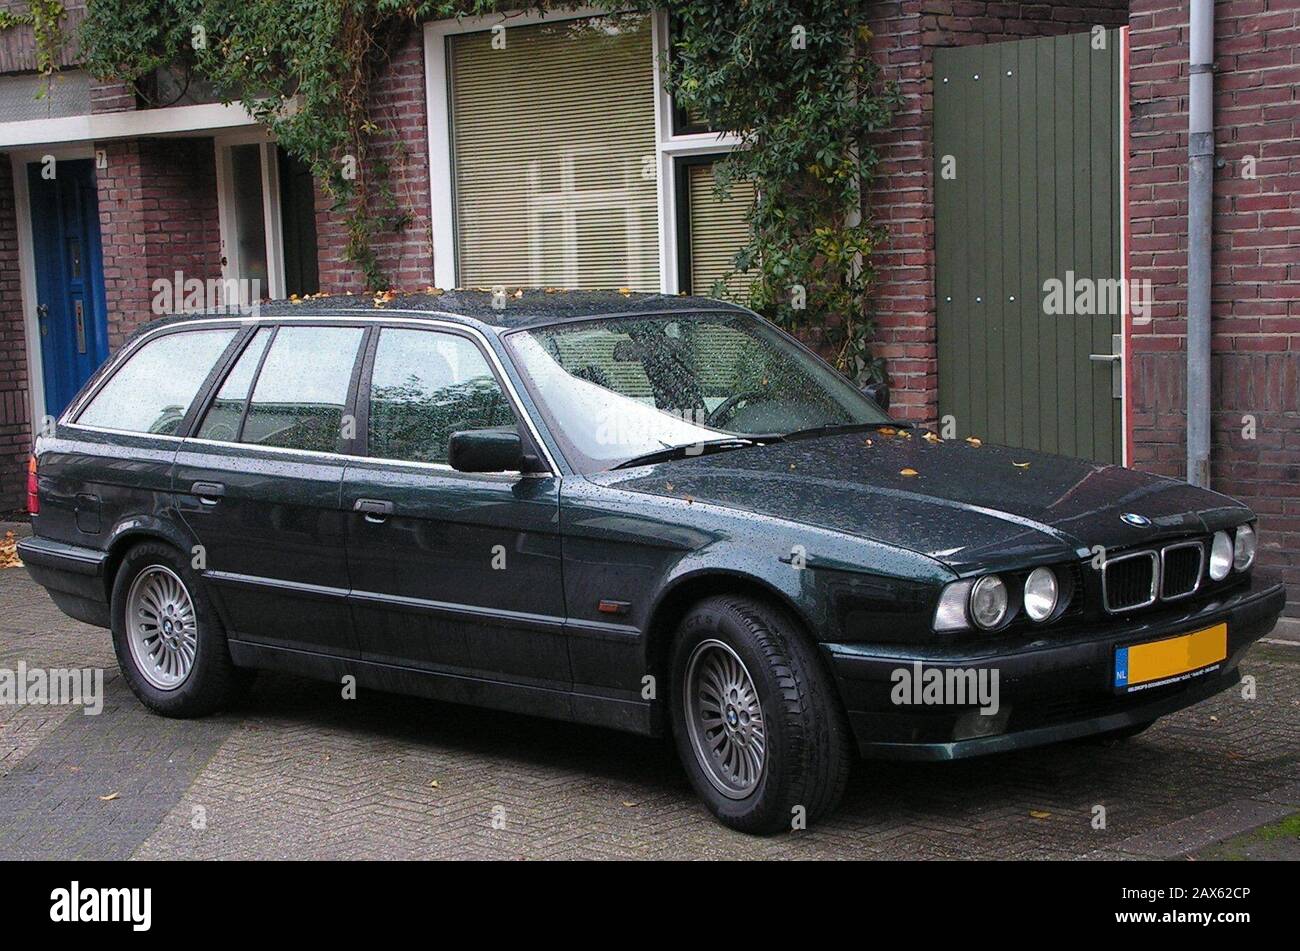 Bmw 520i High Resolution Stock Photography And Images Alamy